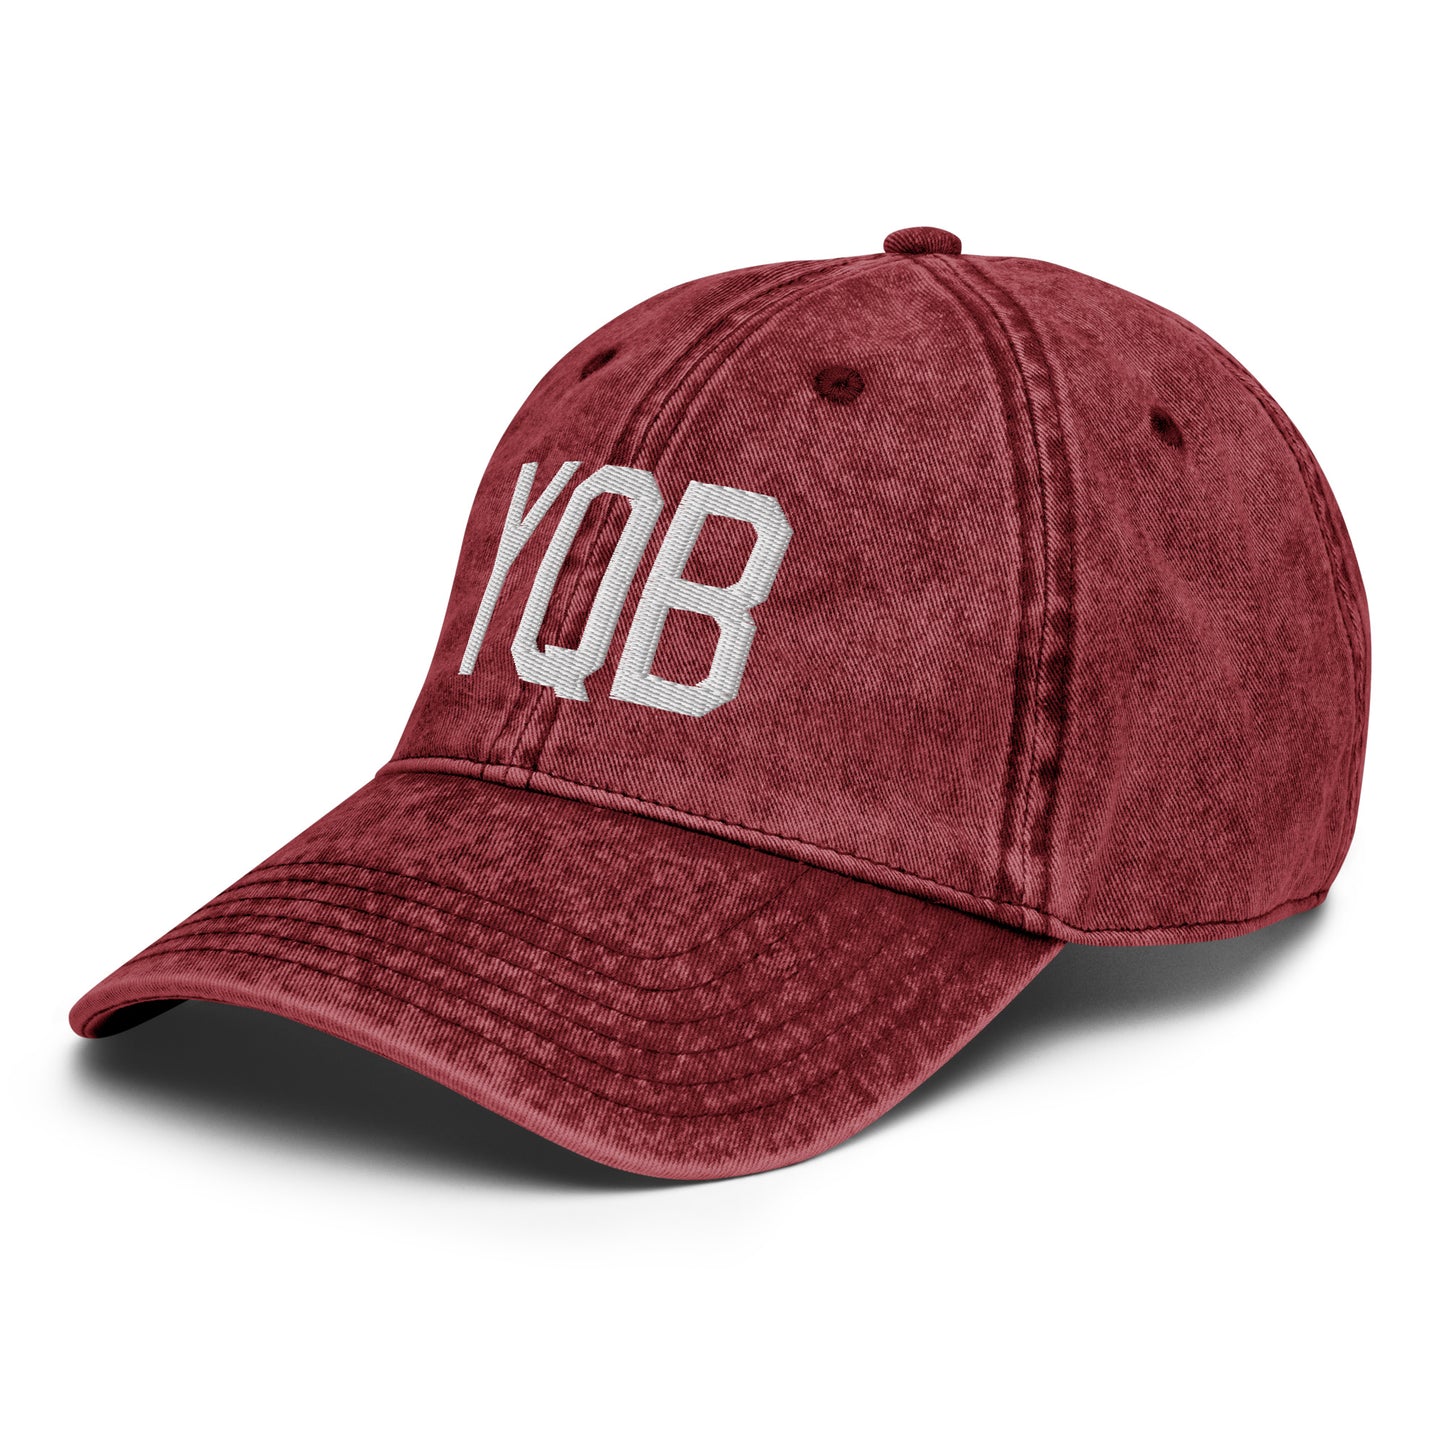 Airport Code Twill Cap - White • YQB Quebec City • YHM Designs - Image 20